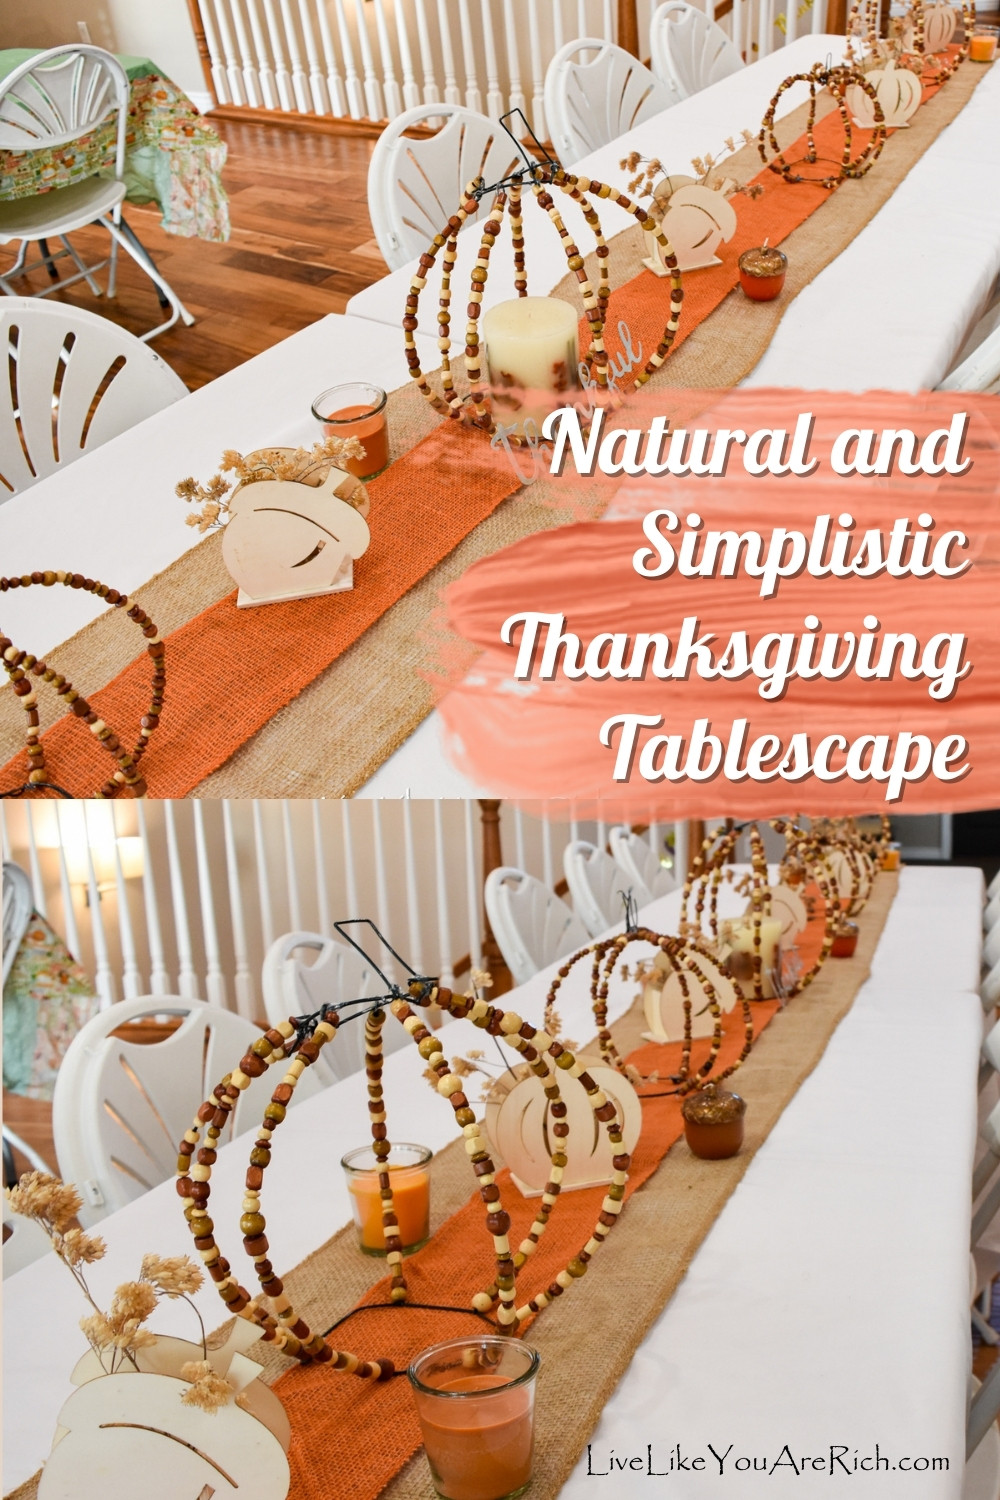 Natural and Simplistic Thanksgiving Tablescape